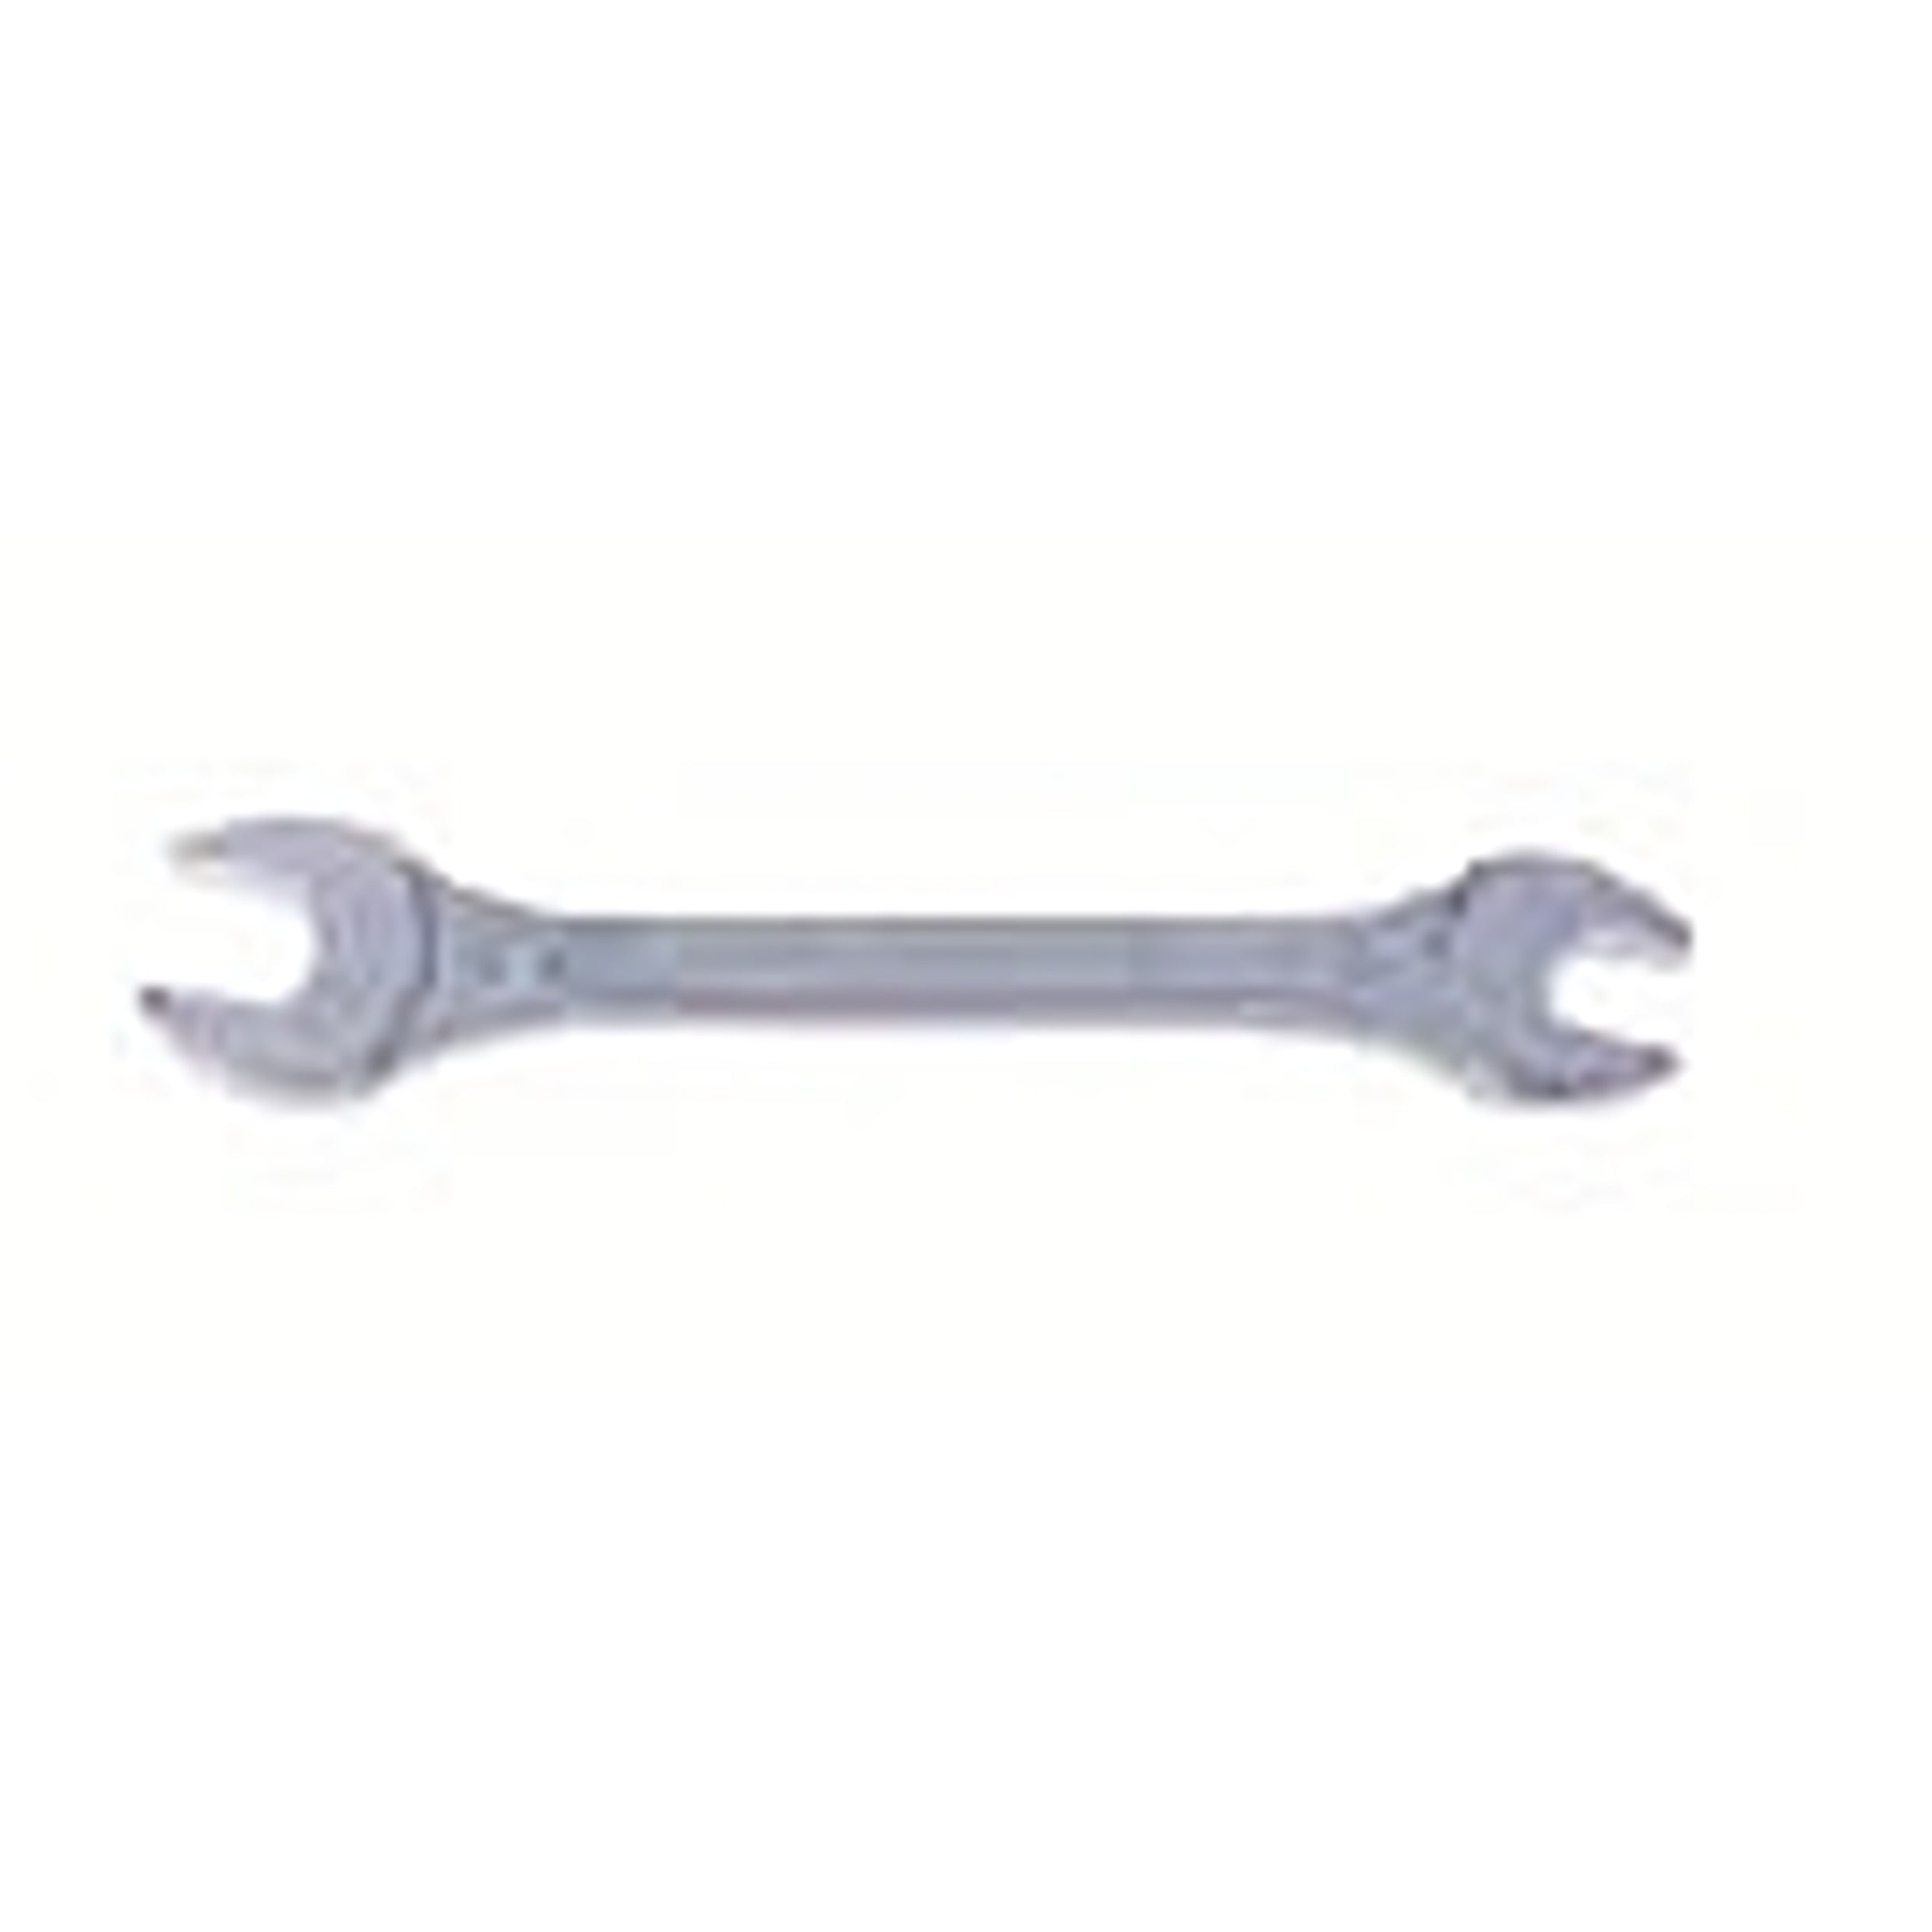 BRITOOL 5J Midget Open Ended Spanner - BA (BRITOOL) - Premium Midget Open Ended Spanner from BRITOOL - Shop now at Yew Aik.